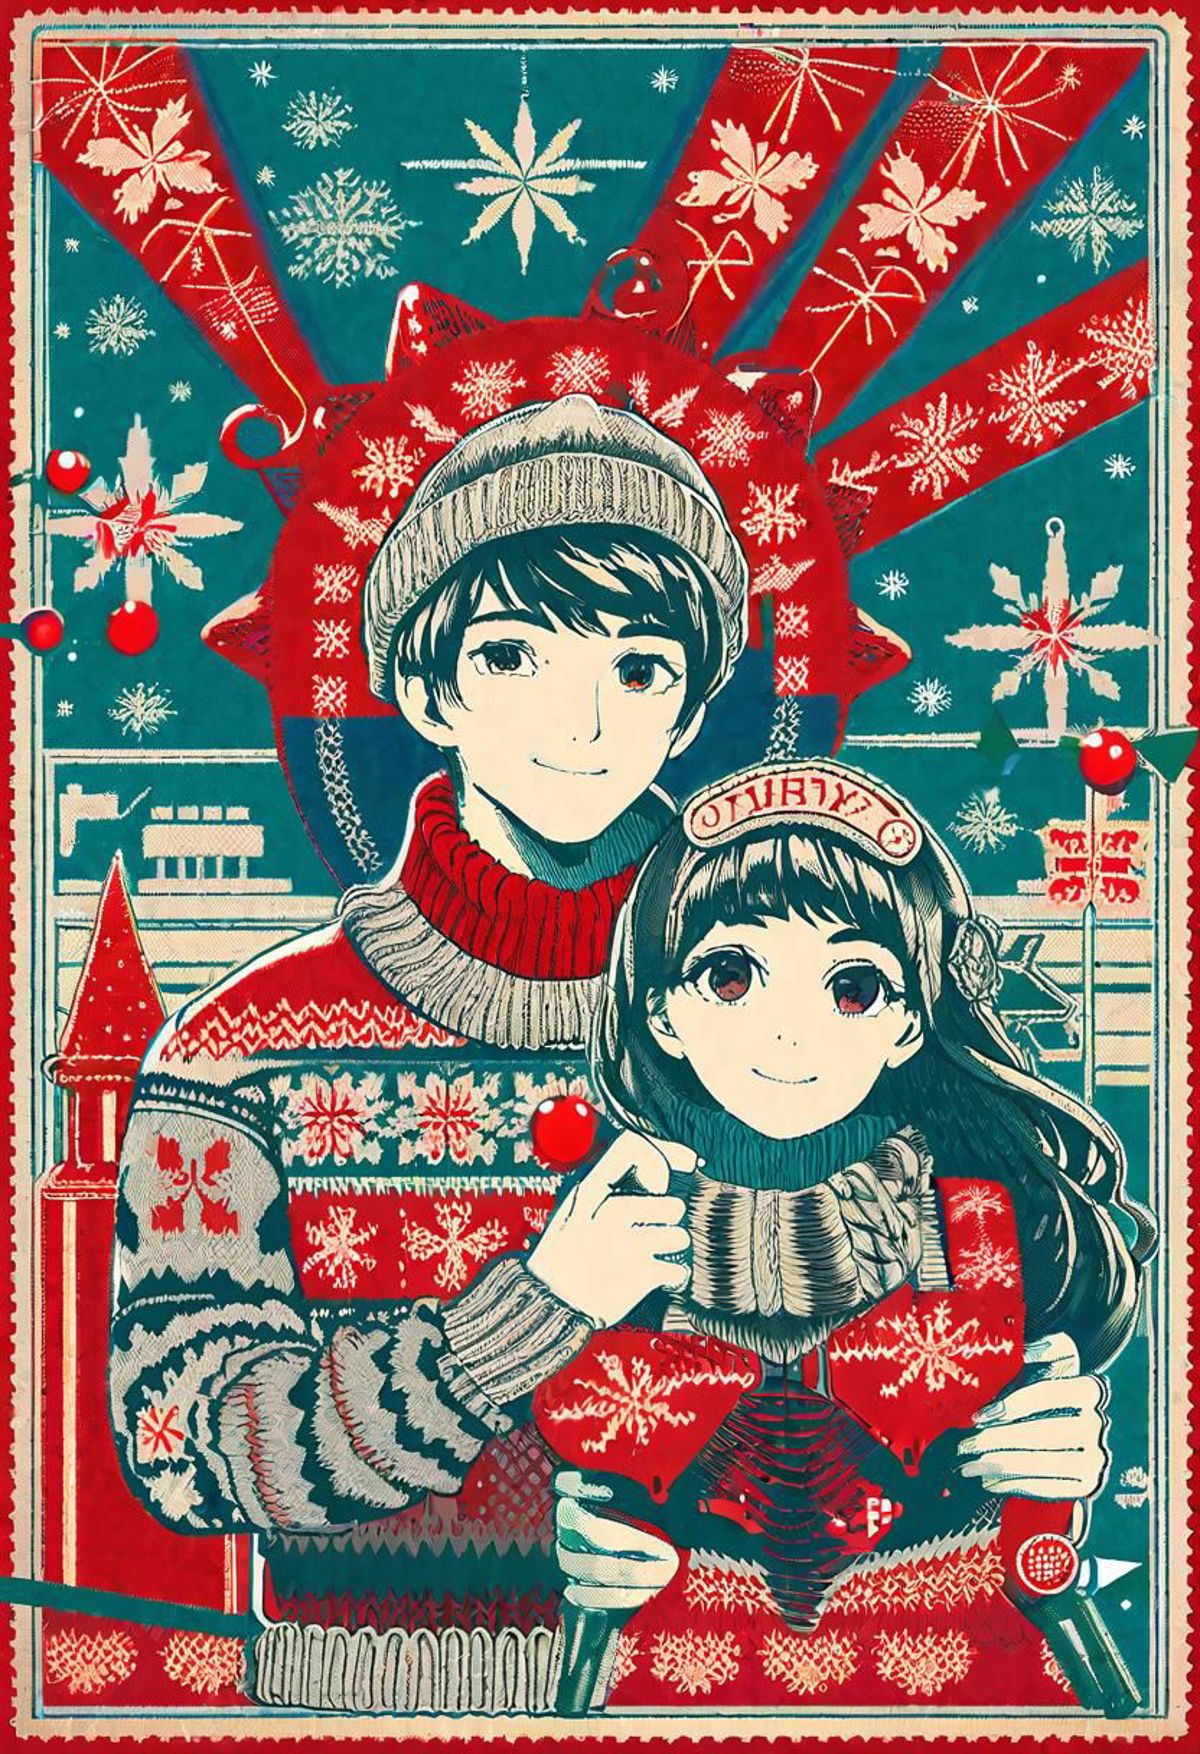 A man and woman wearing winter sweaters and hats, smiling and hugging each other.